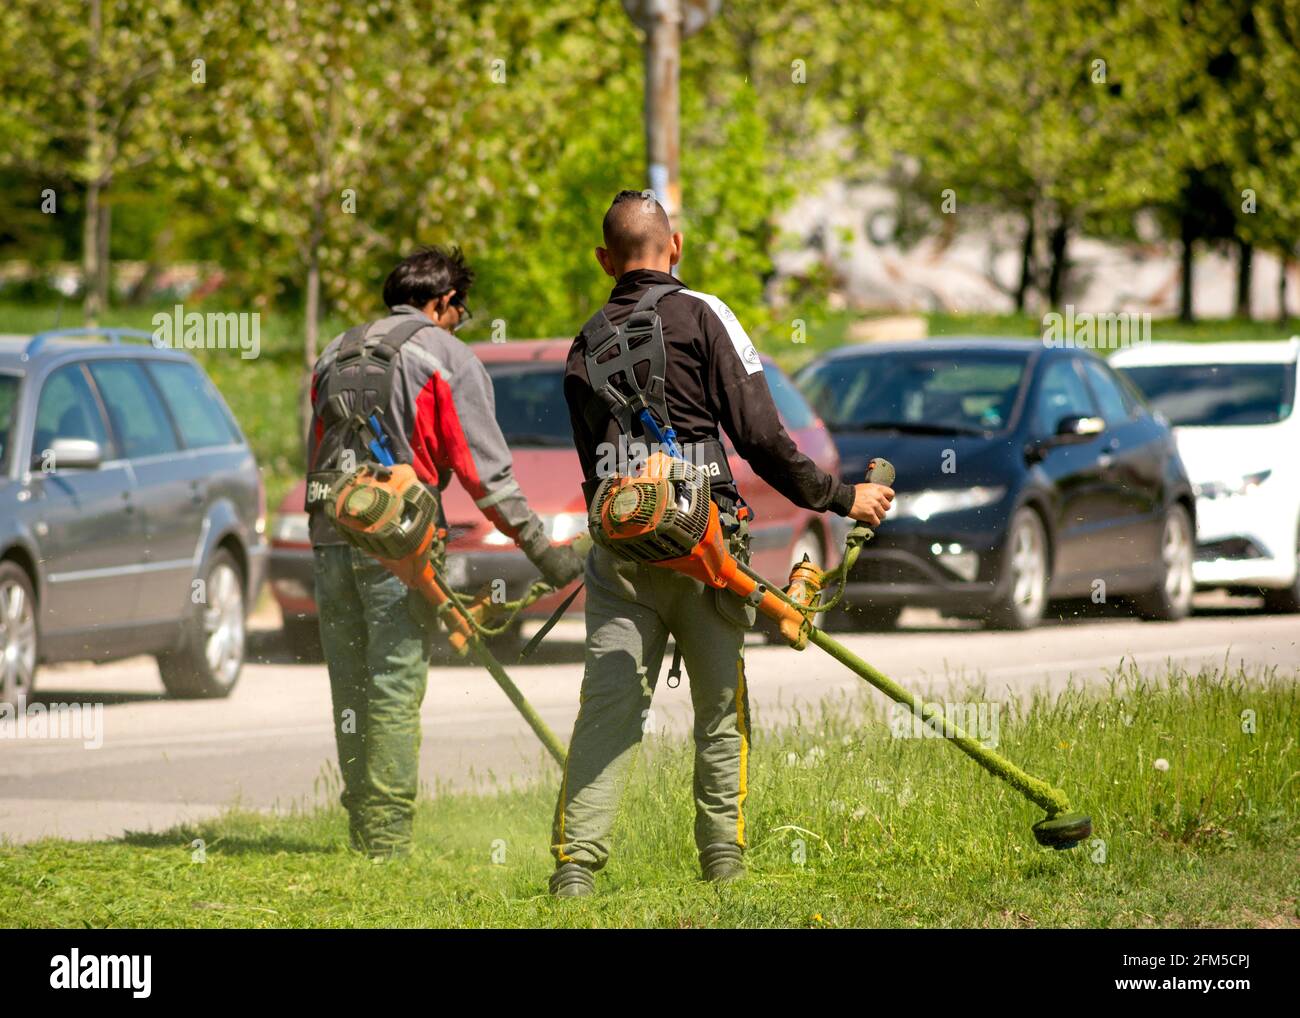 Lawn mower workers. Rear view of council workers cutting grass with Husqvarna trimmers in Sofia, Bulgaria, Eastern Europe, EU Stock Photo